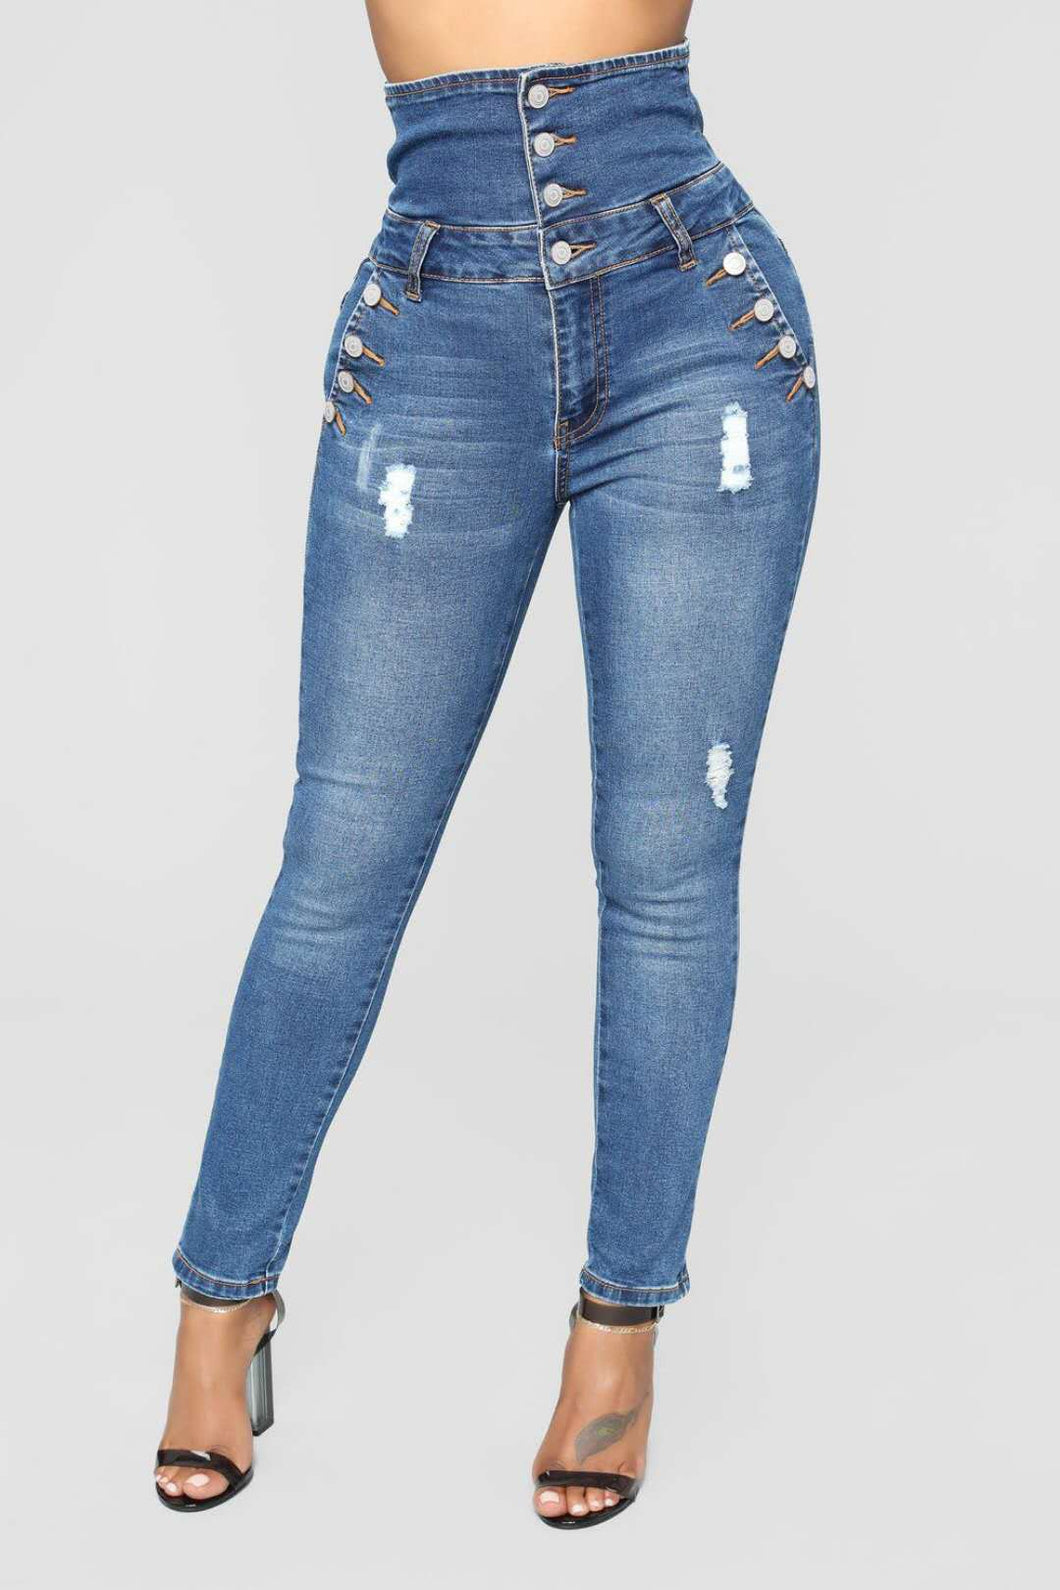 Ripped High Waist Skinny Pencil Jeans